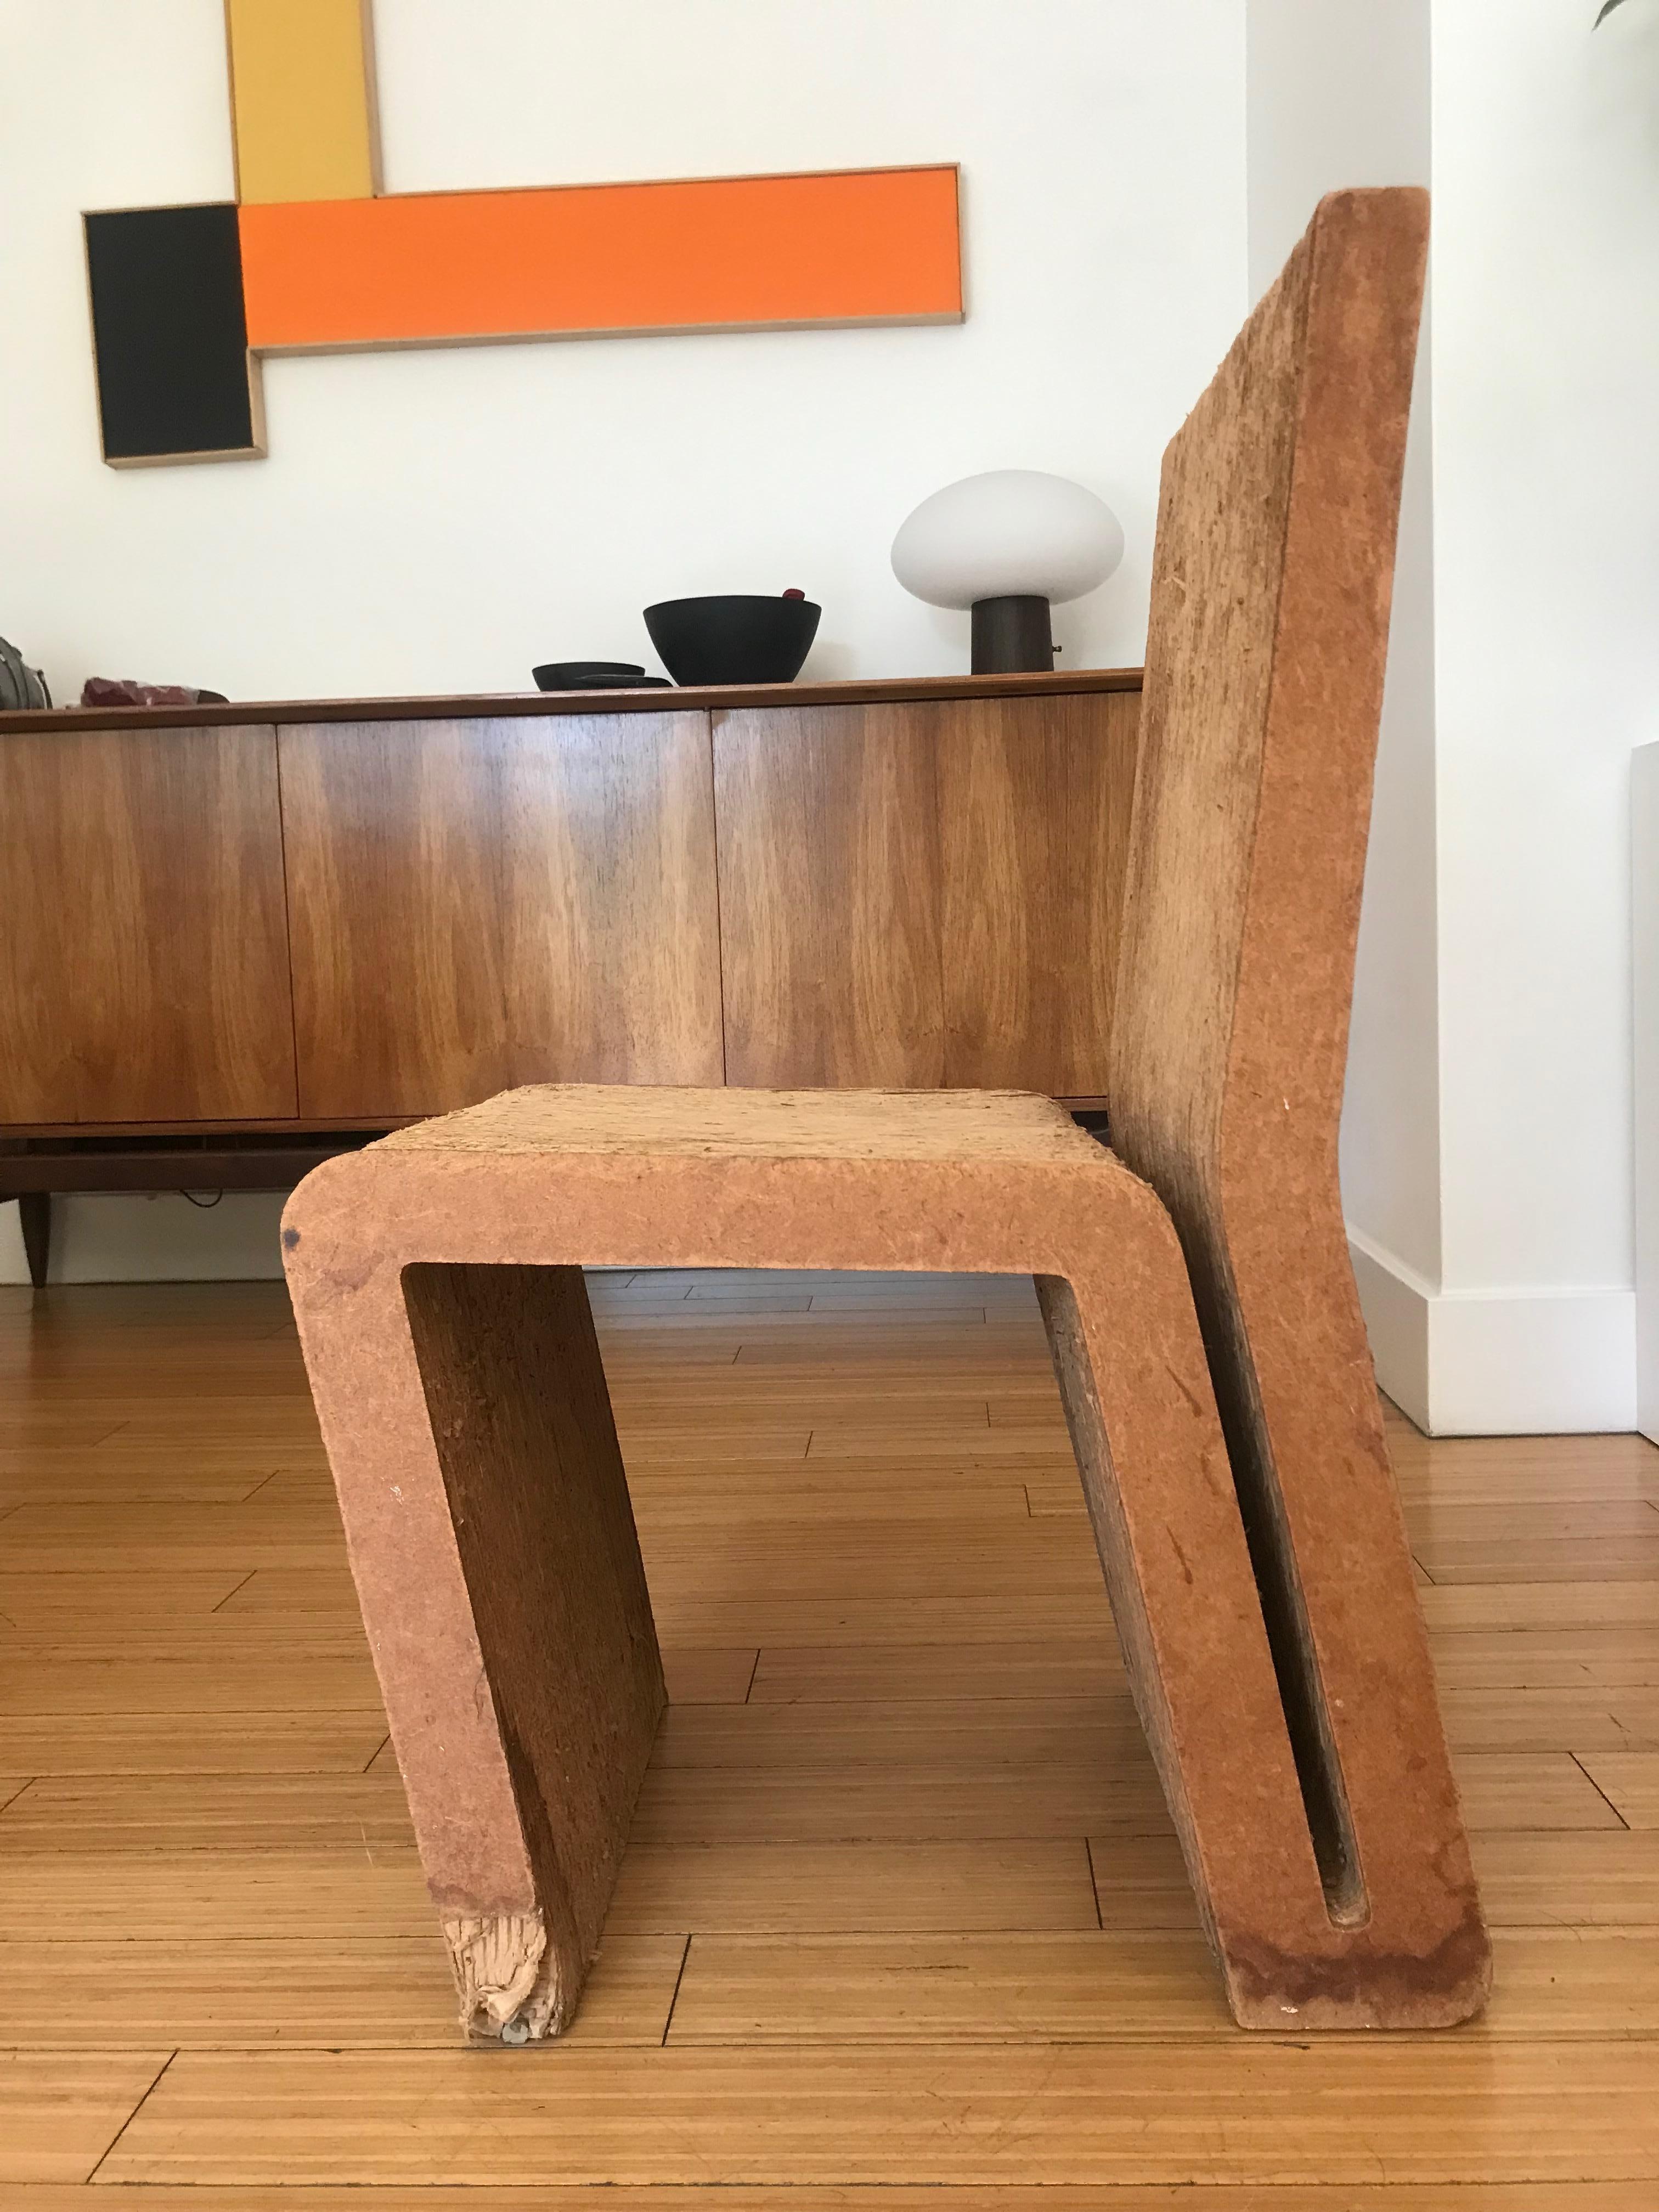 Pressed Frank Gehry 'Easy Edges' Chair Art Object, 1970s